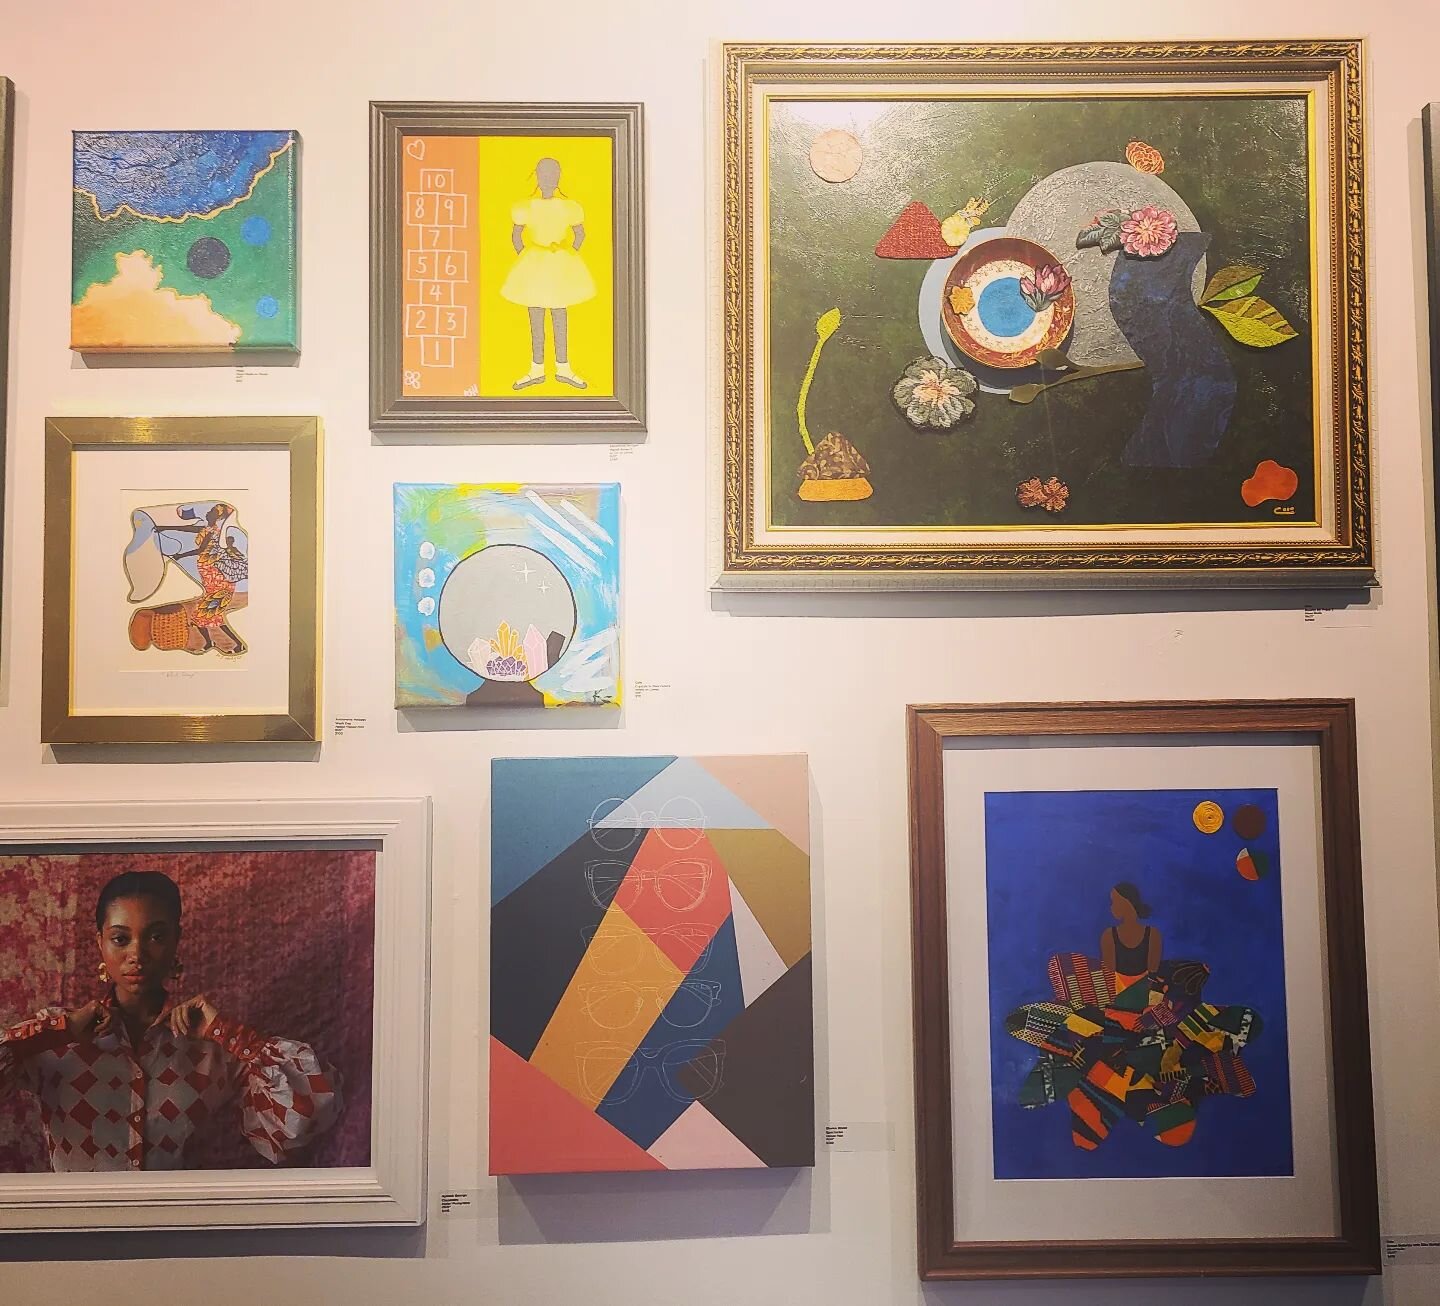 Not my best photographic work, but this photo holds 4 of my 10 works being shown @shopmadeindc Spotlight Show. Issa pretty big deal for me 🖤🥲 2 works have already been sold 😳

Artist talk coming up on May 3rd!

#abstractart #blackart #blackartist 